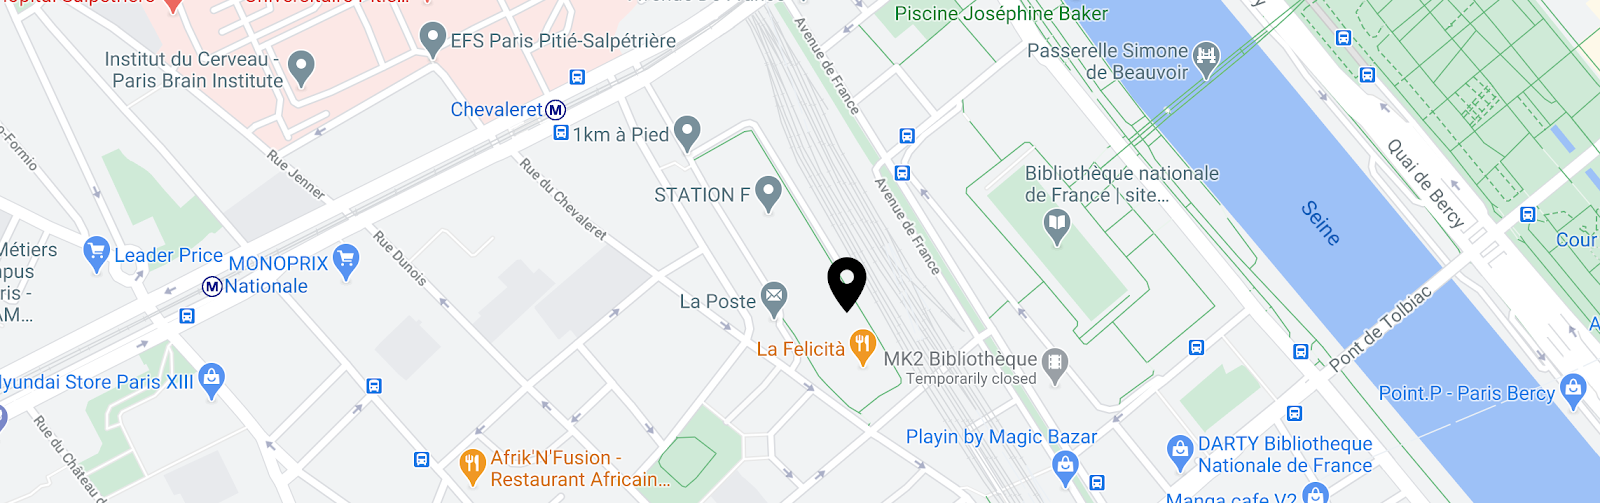 Your order will be ready 15 mins before the scheduled pick up. You can collect your order at the address below: 5 Rue Eugène Freyssinet, 75013 Paris.